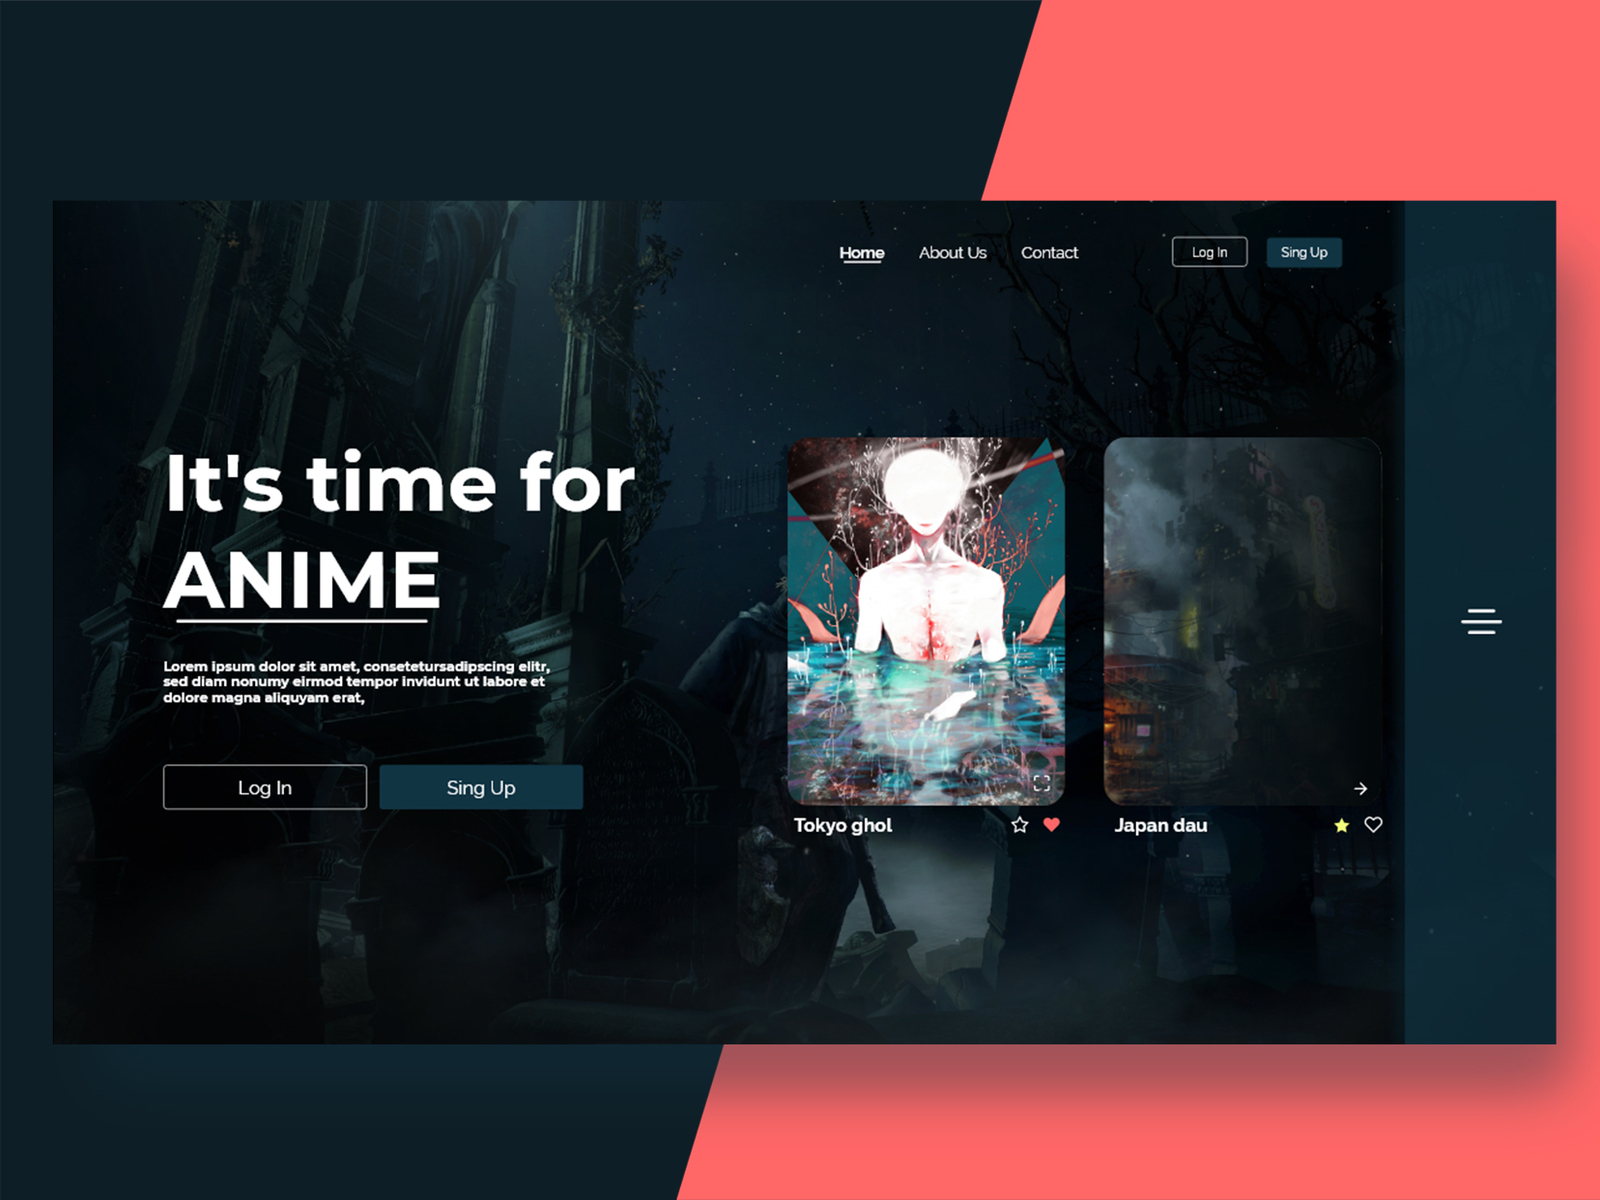 Web design concept for an anime website by Crackedesign. on Dribbble